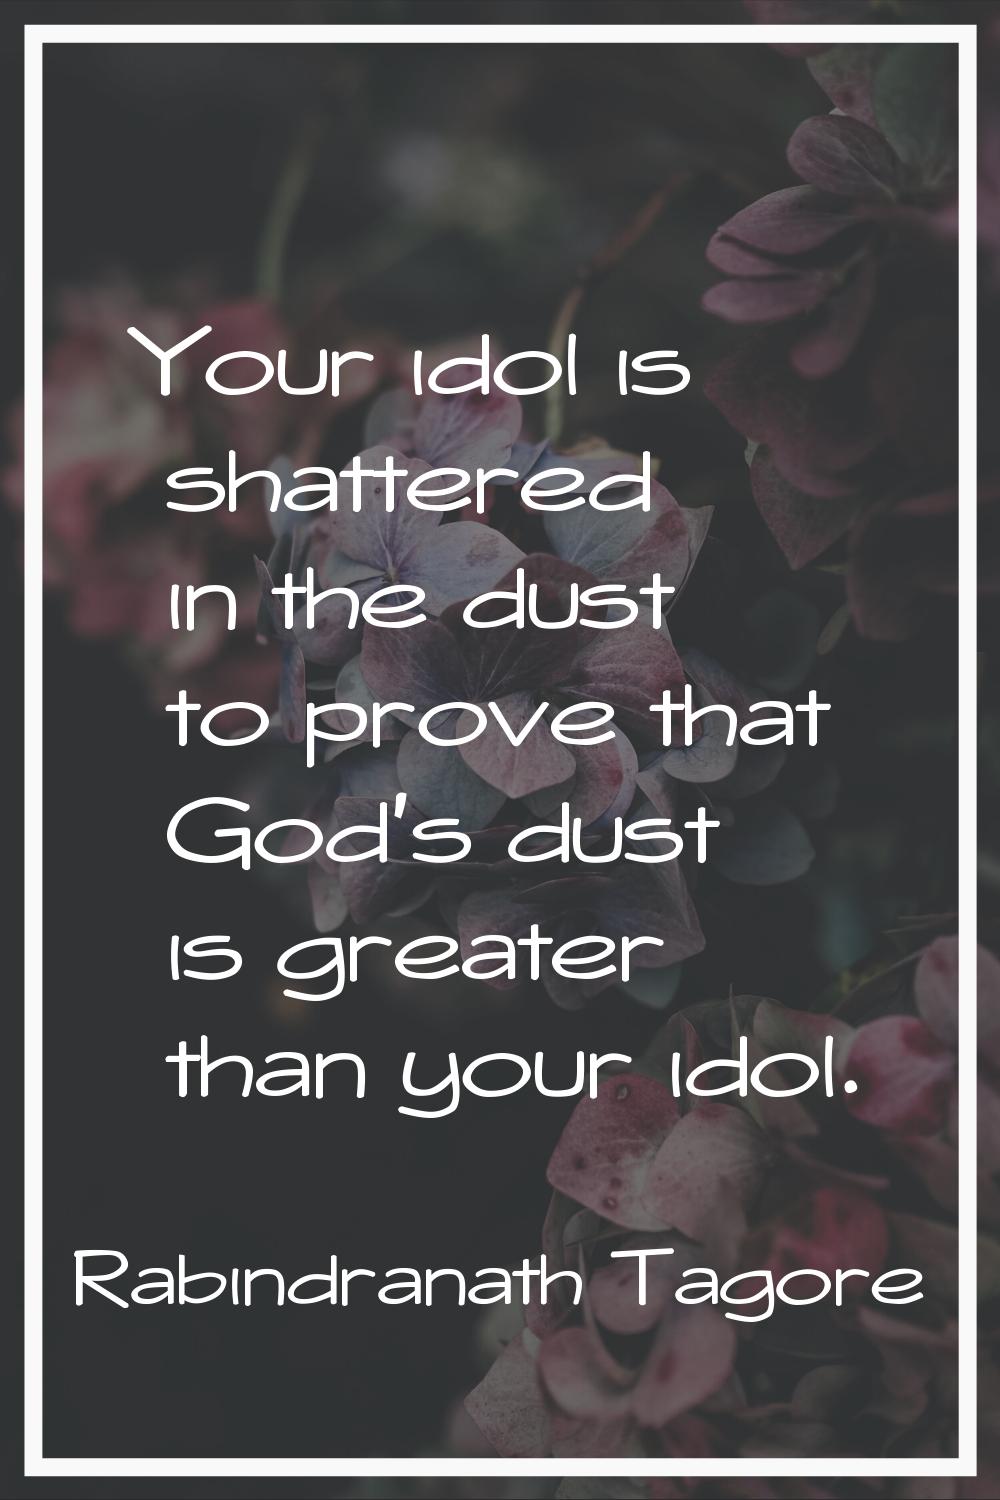 Your idol is shattered in the dust to prove that God's dust is greater than your idol.